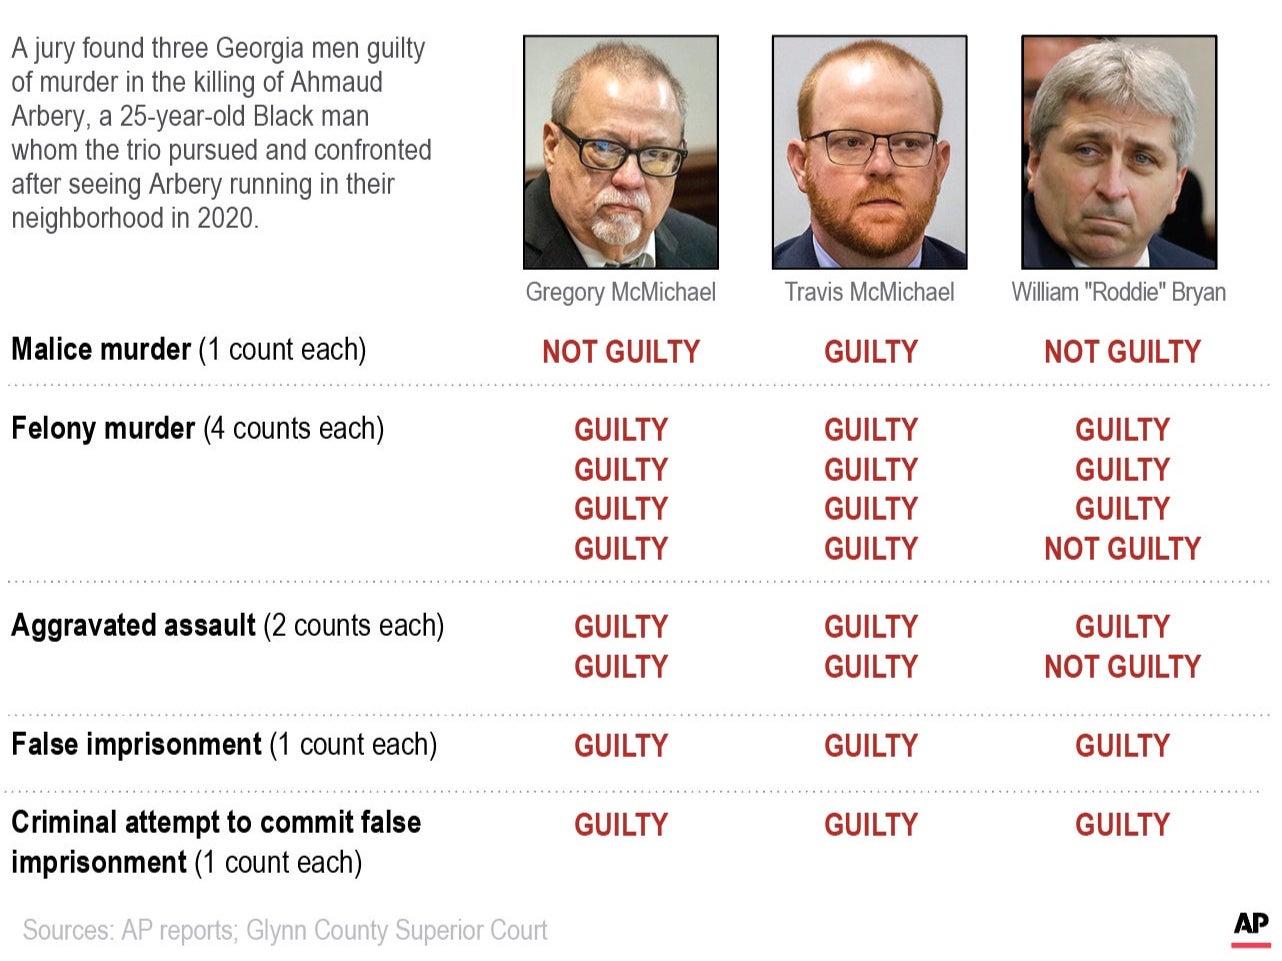 The charges the three men were found guilty of at their state trial